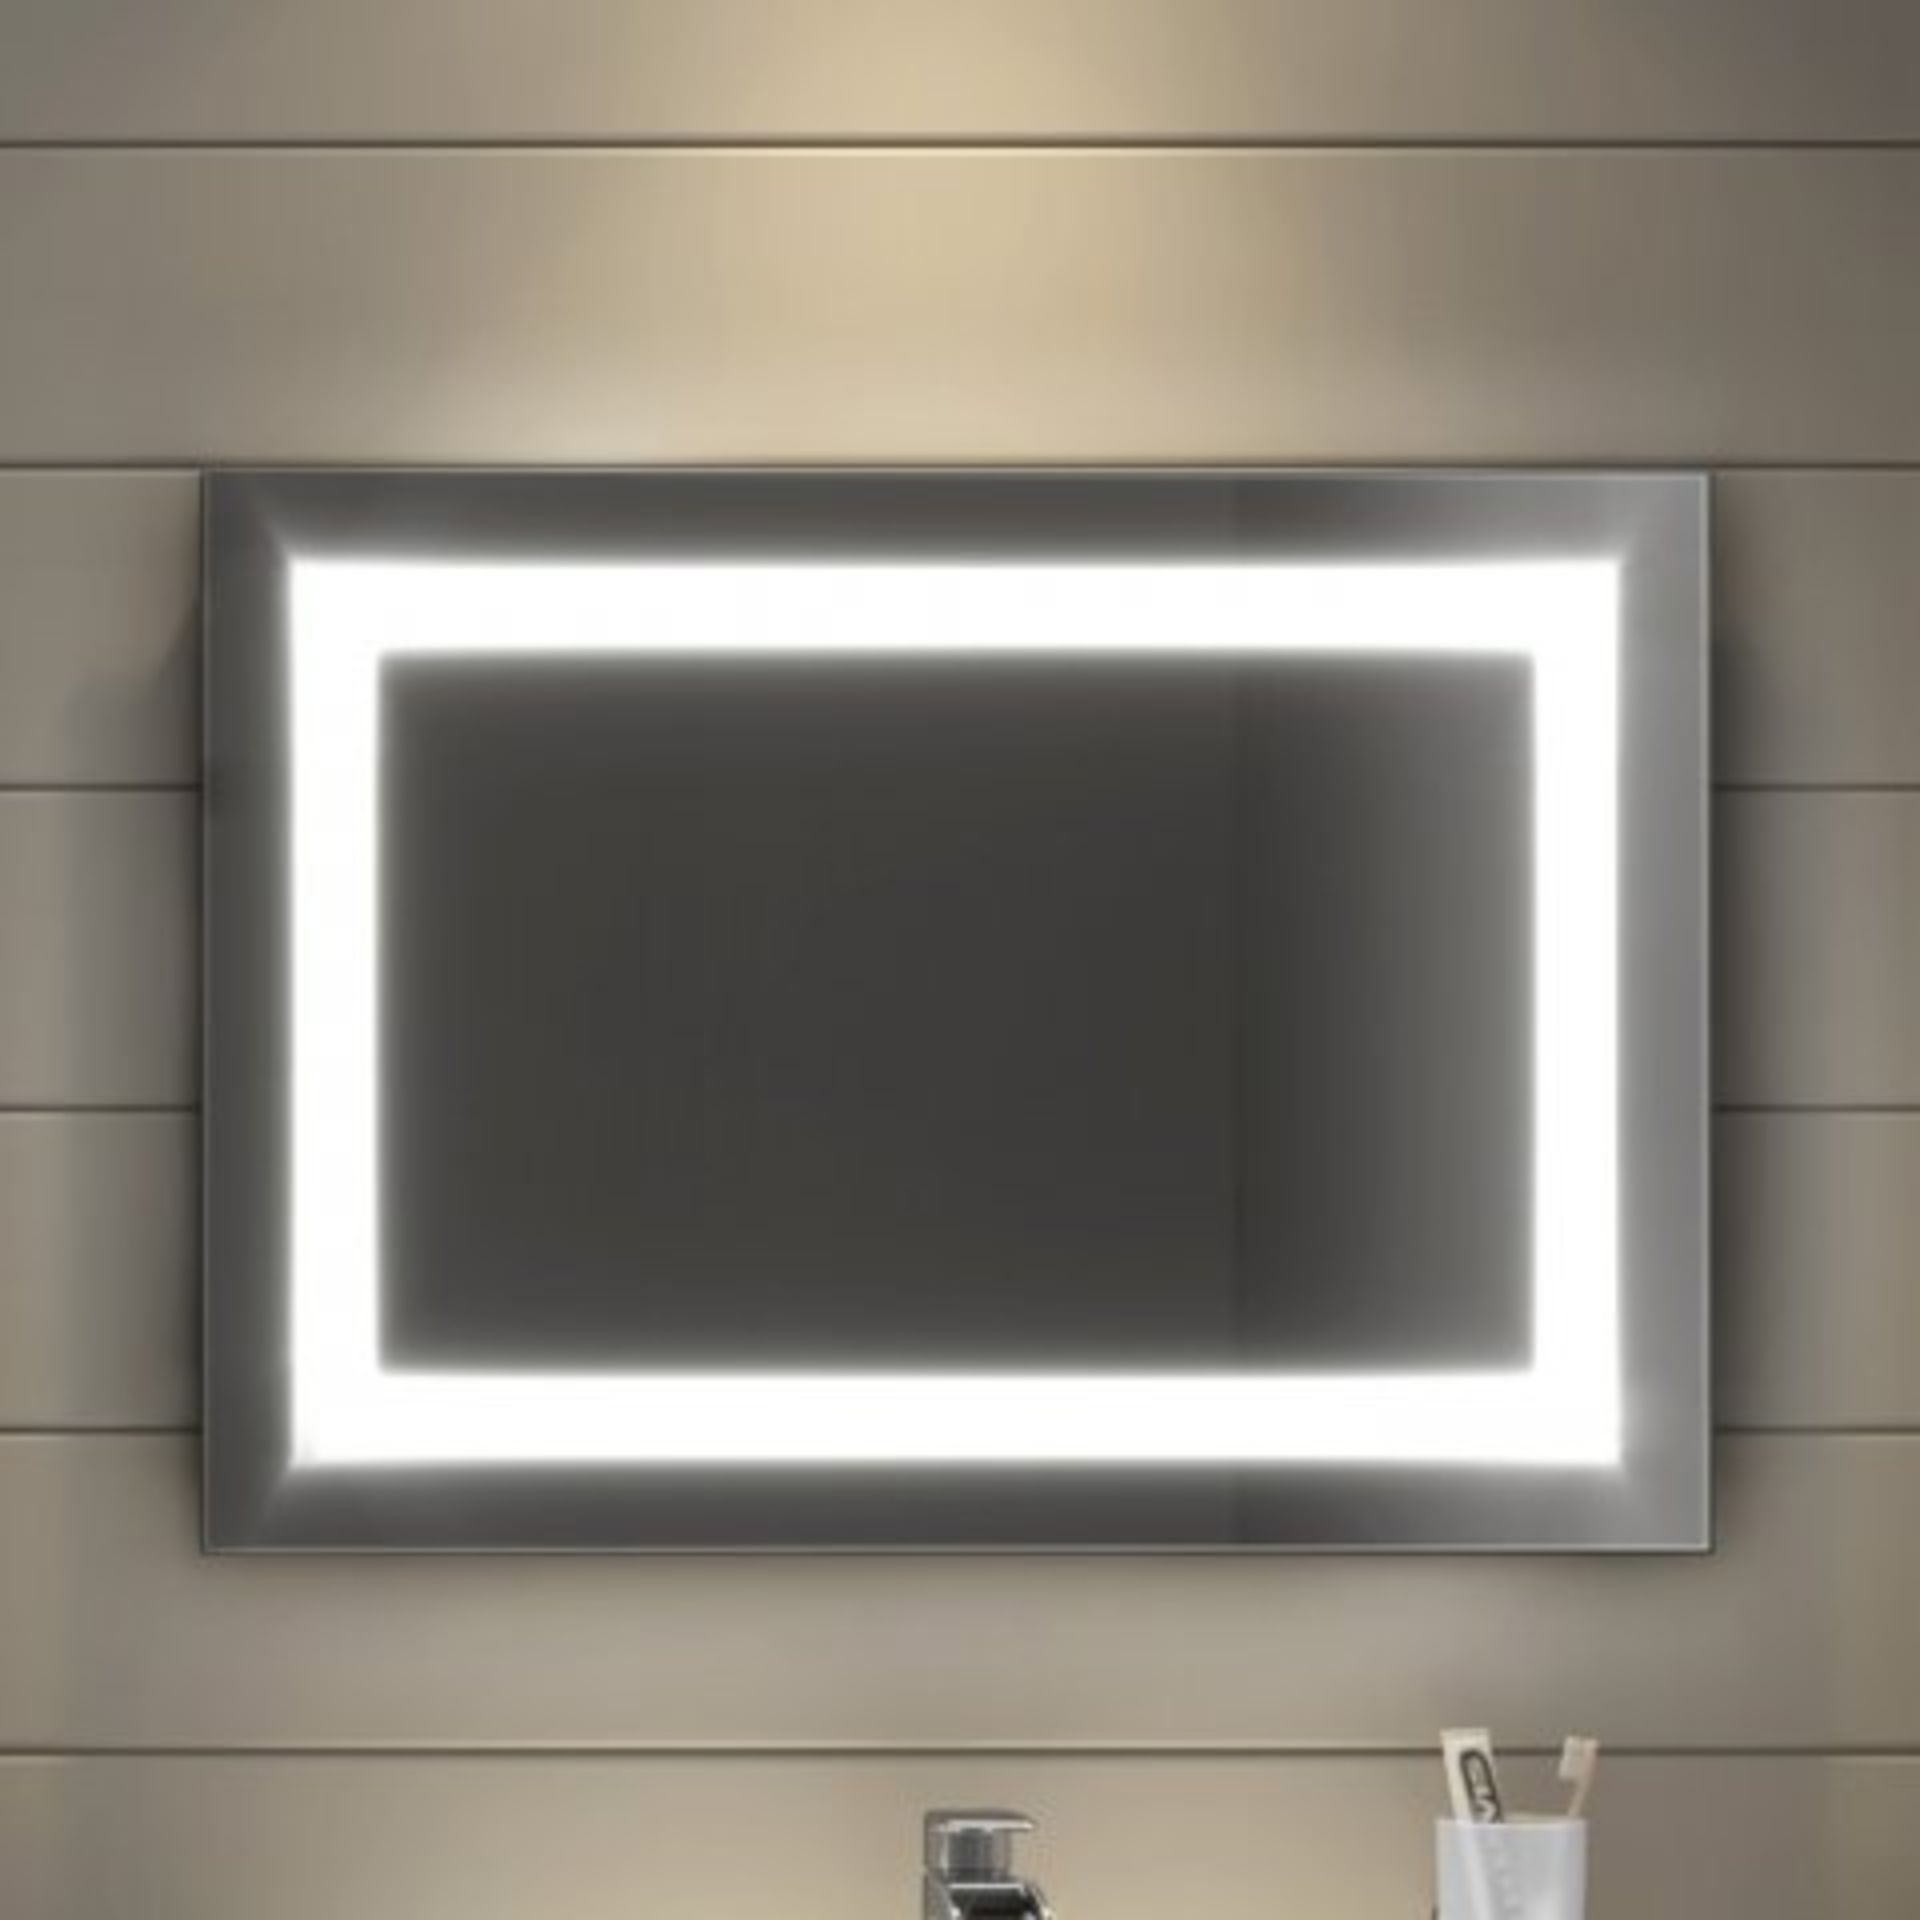 (H209) 500x700mm Nova Illuminated LED Mirror. RRP £349.99. Perfect Reflection The featured mirror